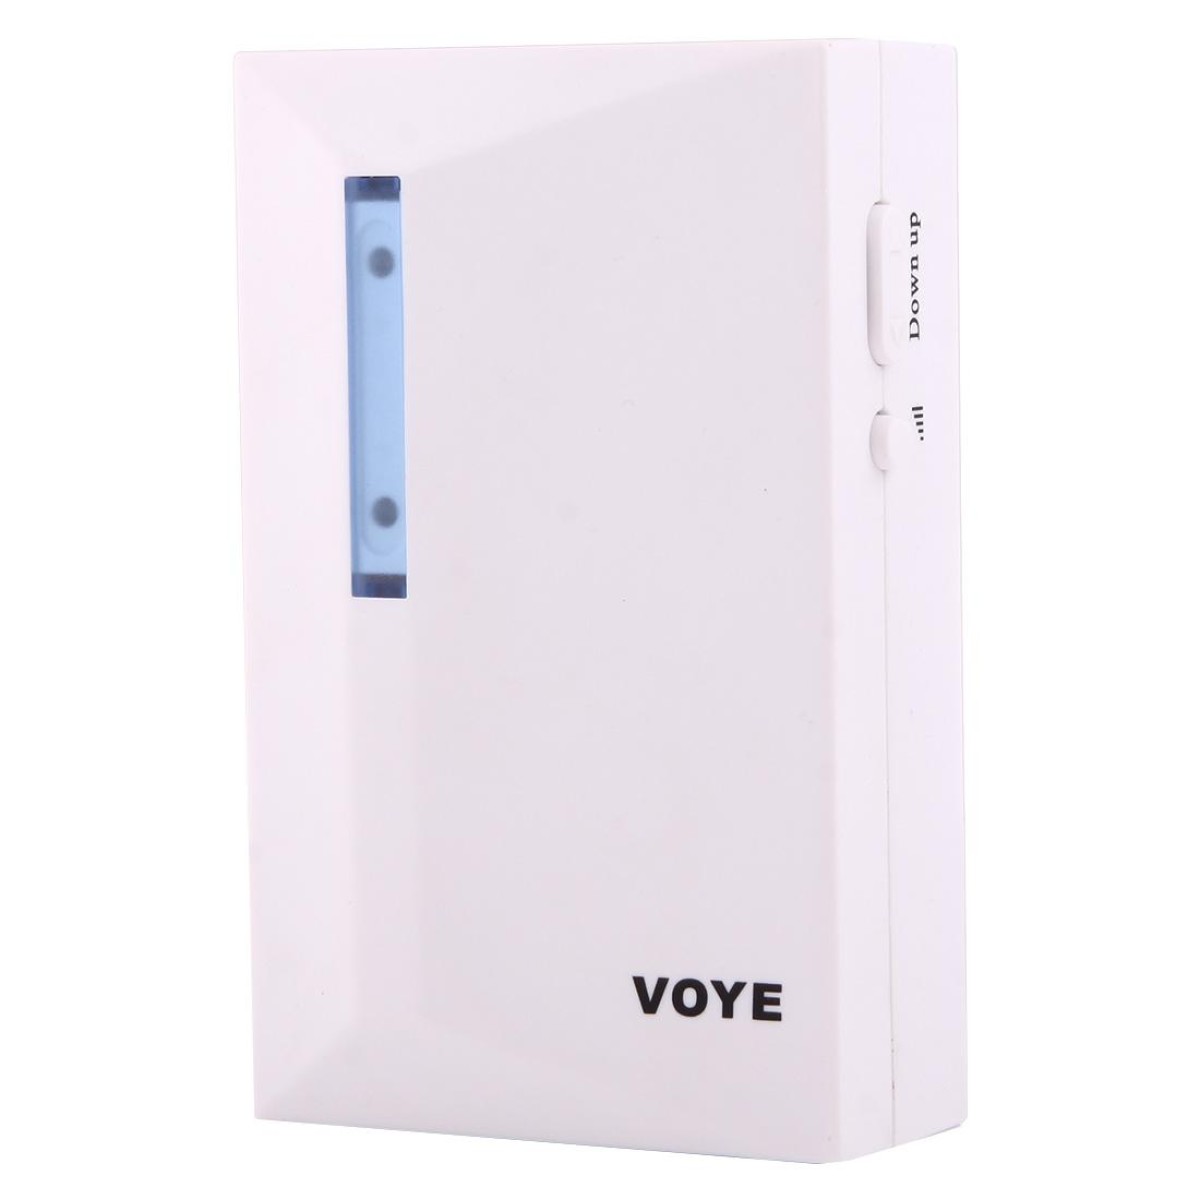 VOYE V015F2 Wireless Smart Music Home Doorbell with Dual Receiver, Remote Control Distance: 120m (Open Air)